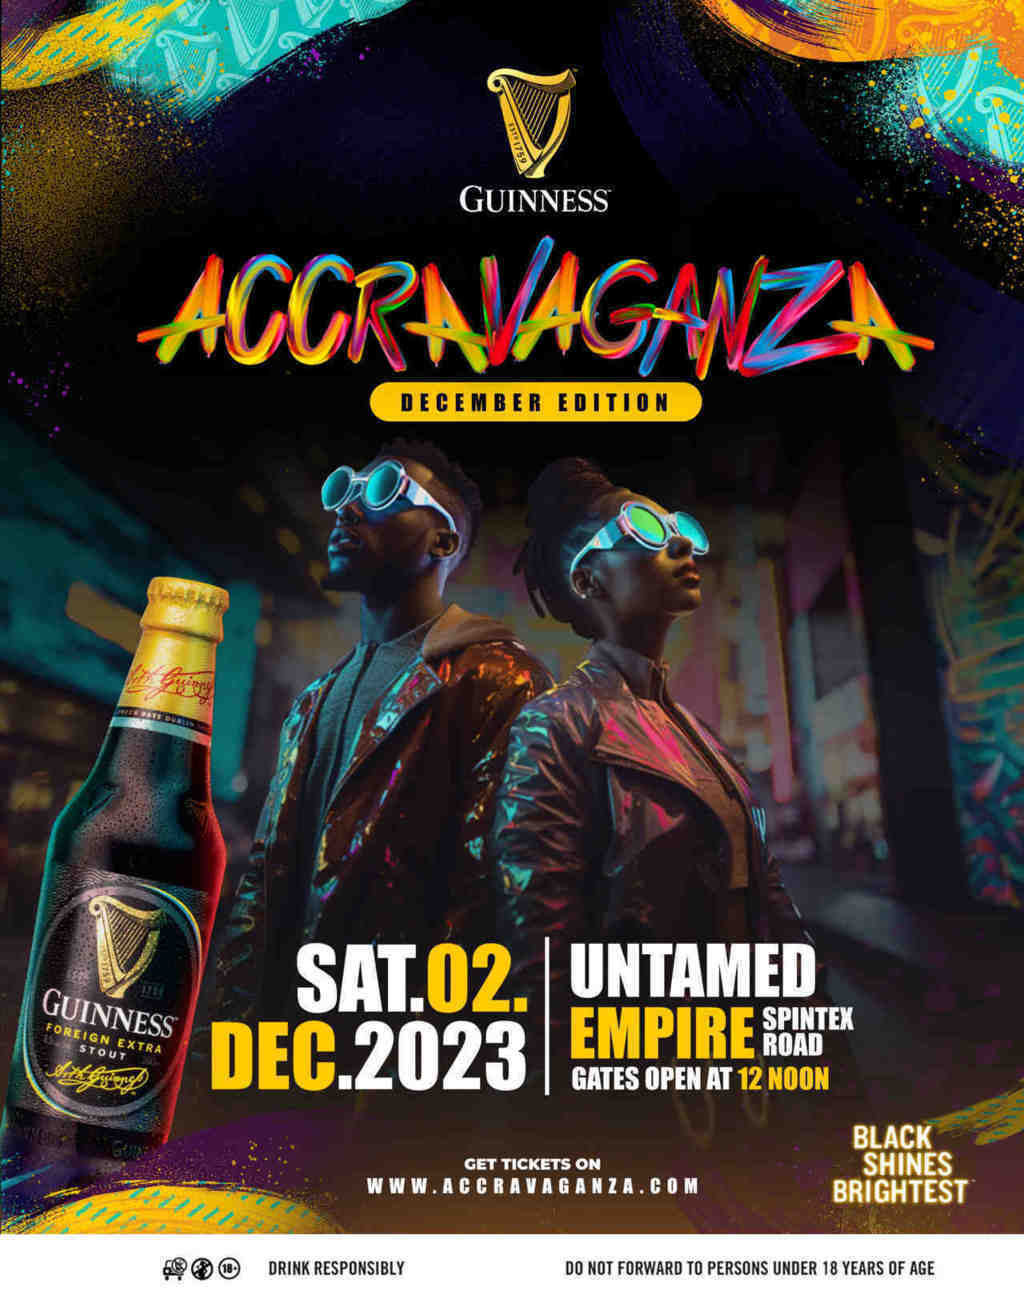 ROAD TO ACCRAVAGANZA 2 – A GUINNESS AFFAIR